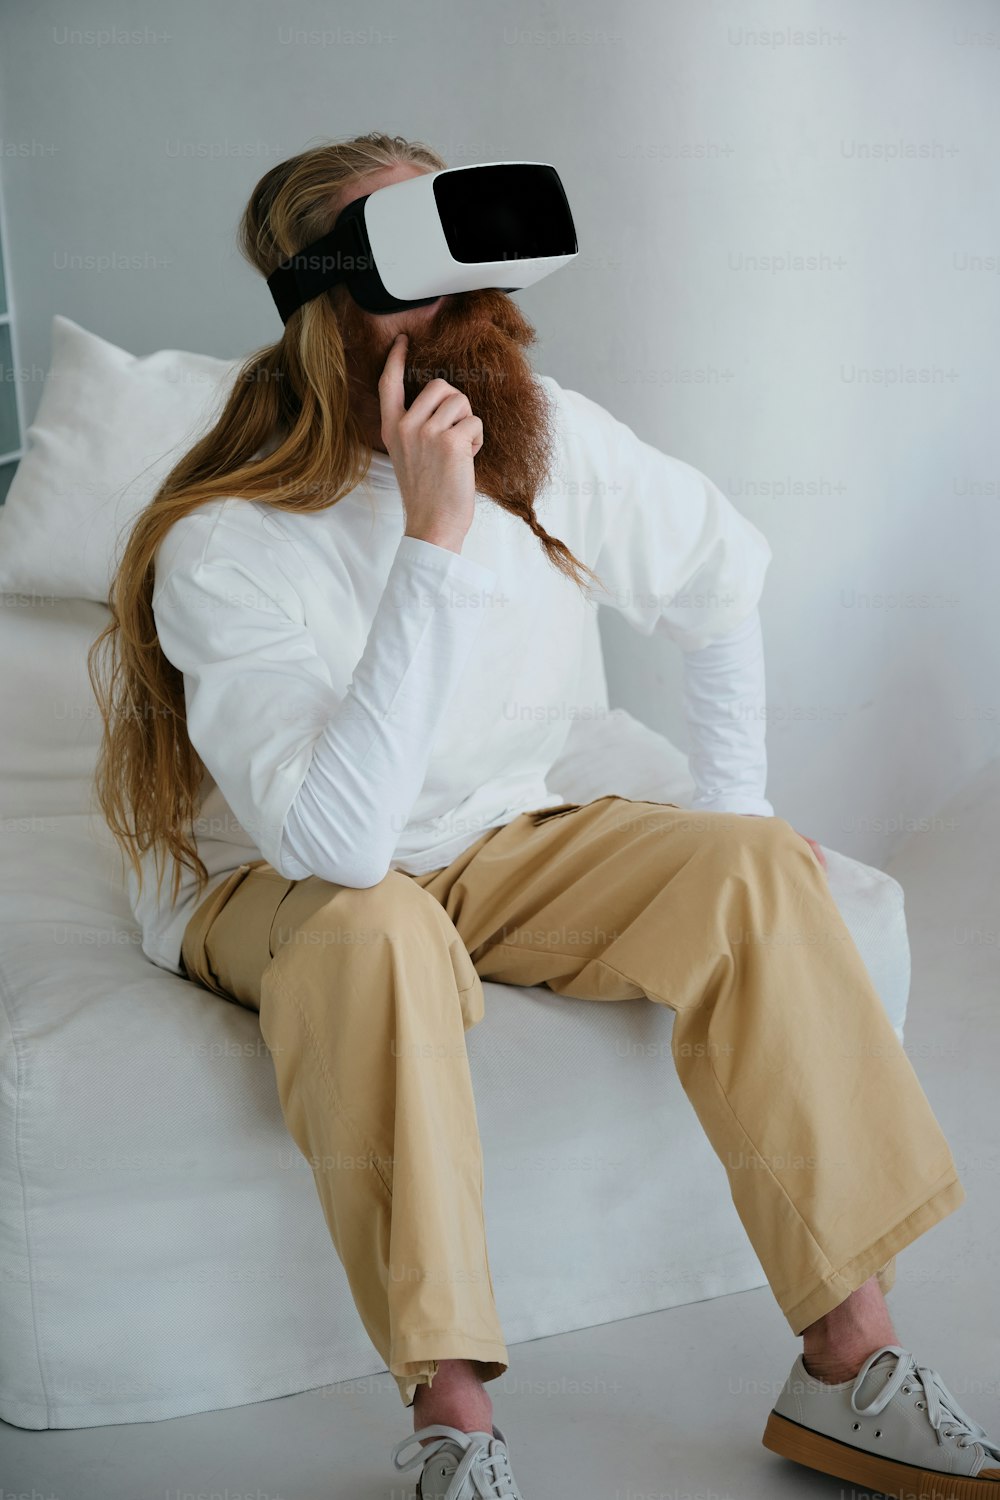 a woman sitting on a couch wearing a white shirt and tan pants